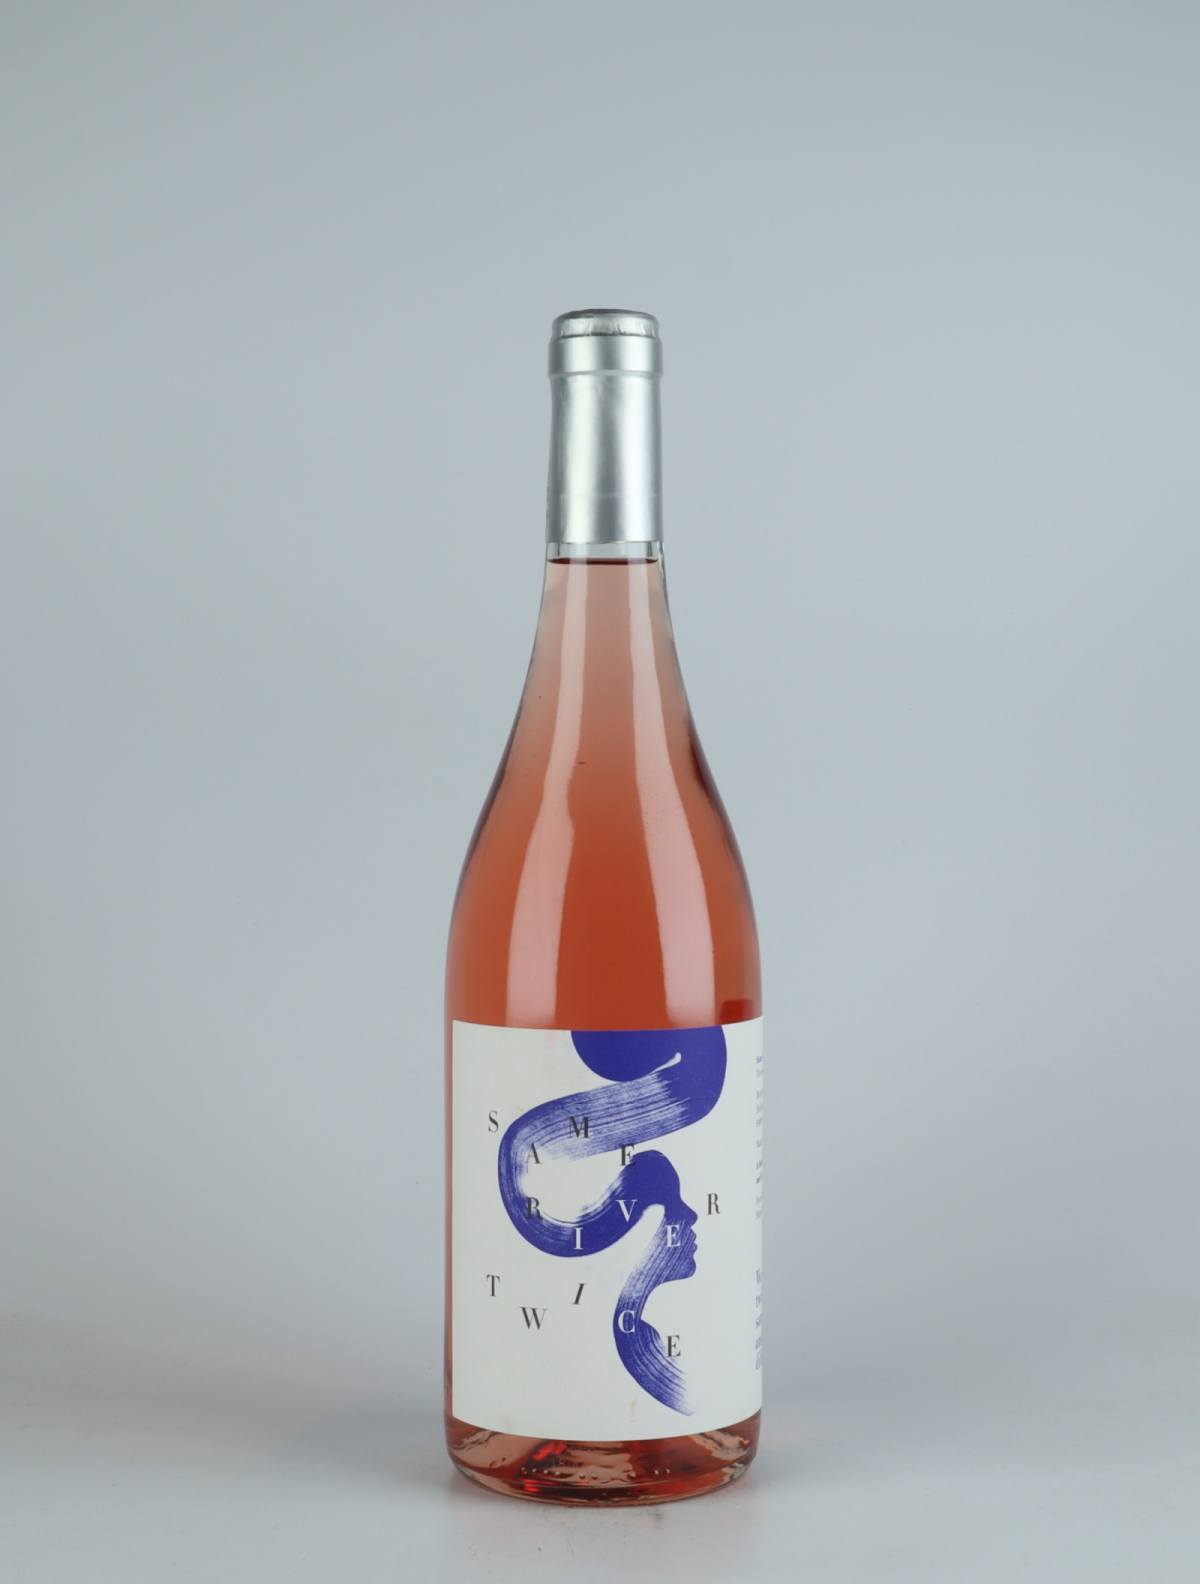 A bottle 2021 Same River Twice Rosé Rosé from Heliocentric Wines, Rhône in France